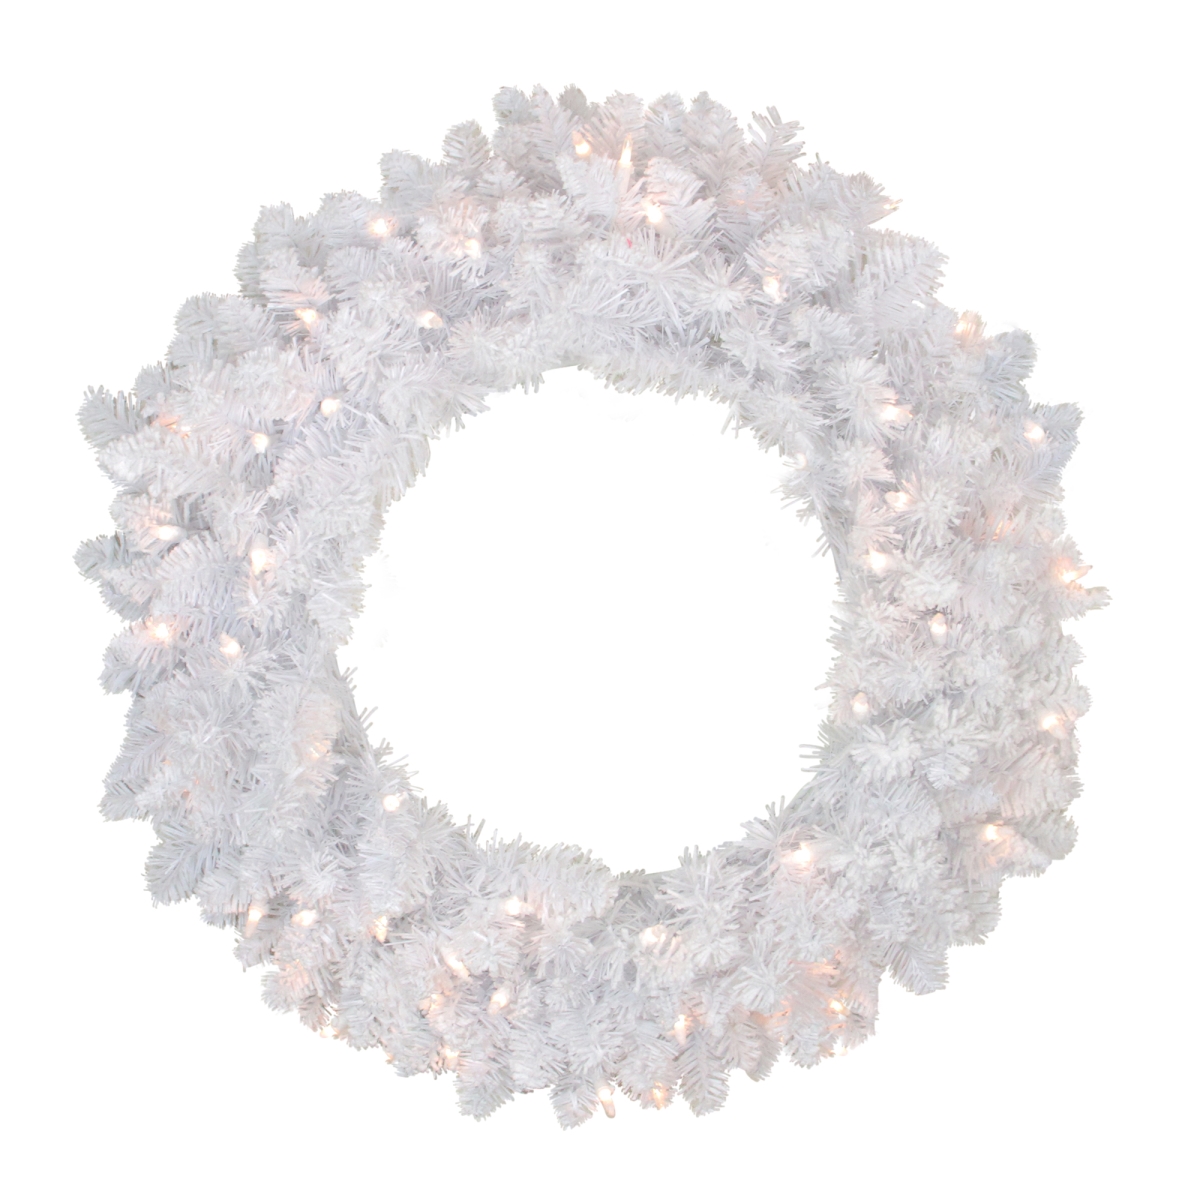 33370939 36 In. Pre-lit Flocked Snow White Artificial Christmas Wreath - Clear Lights